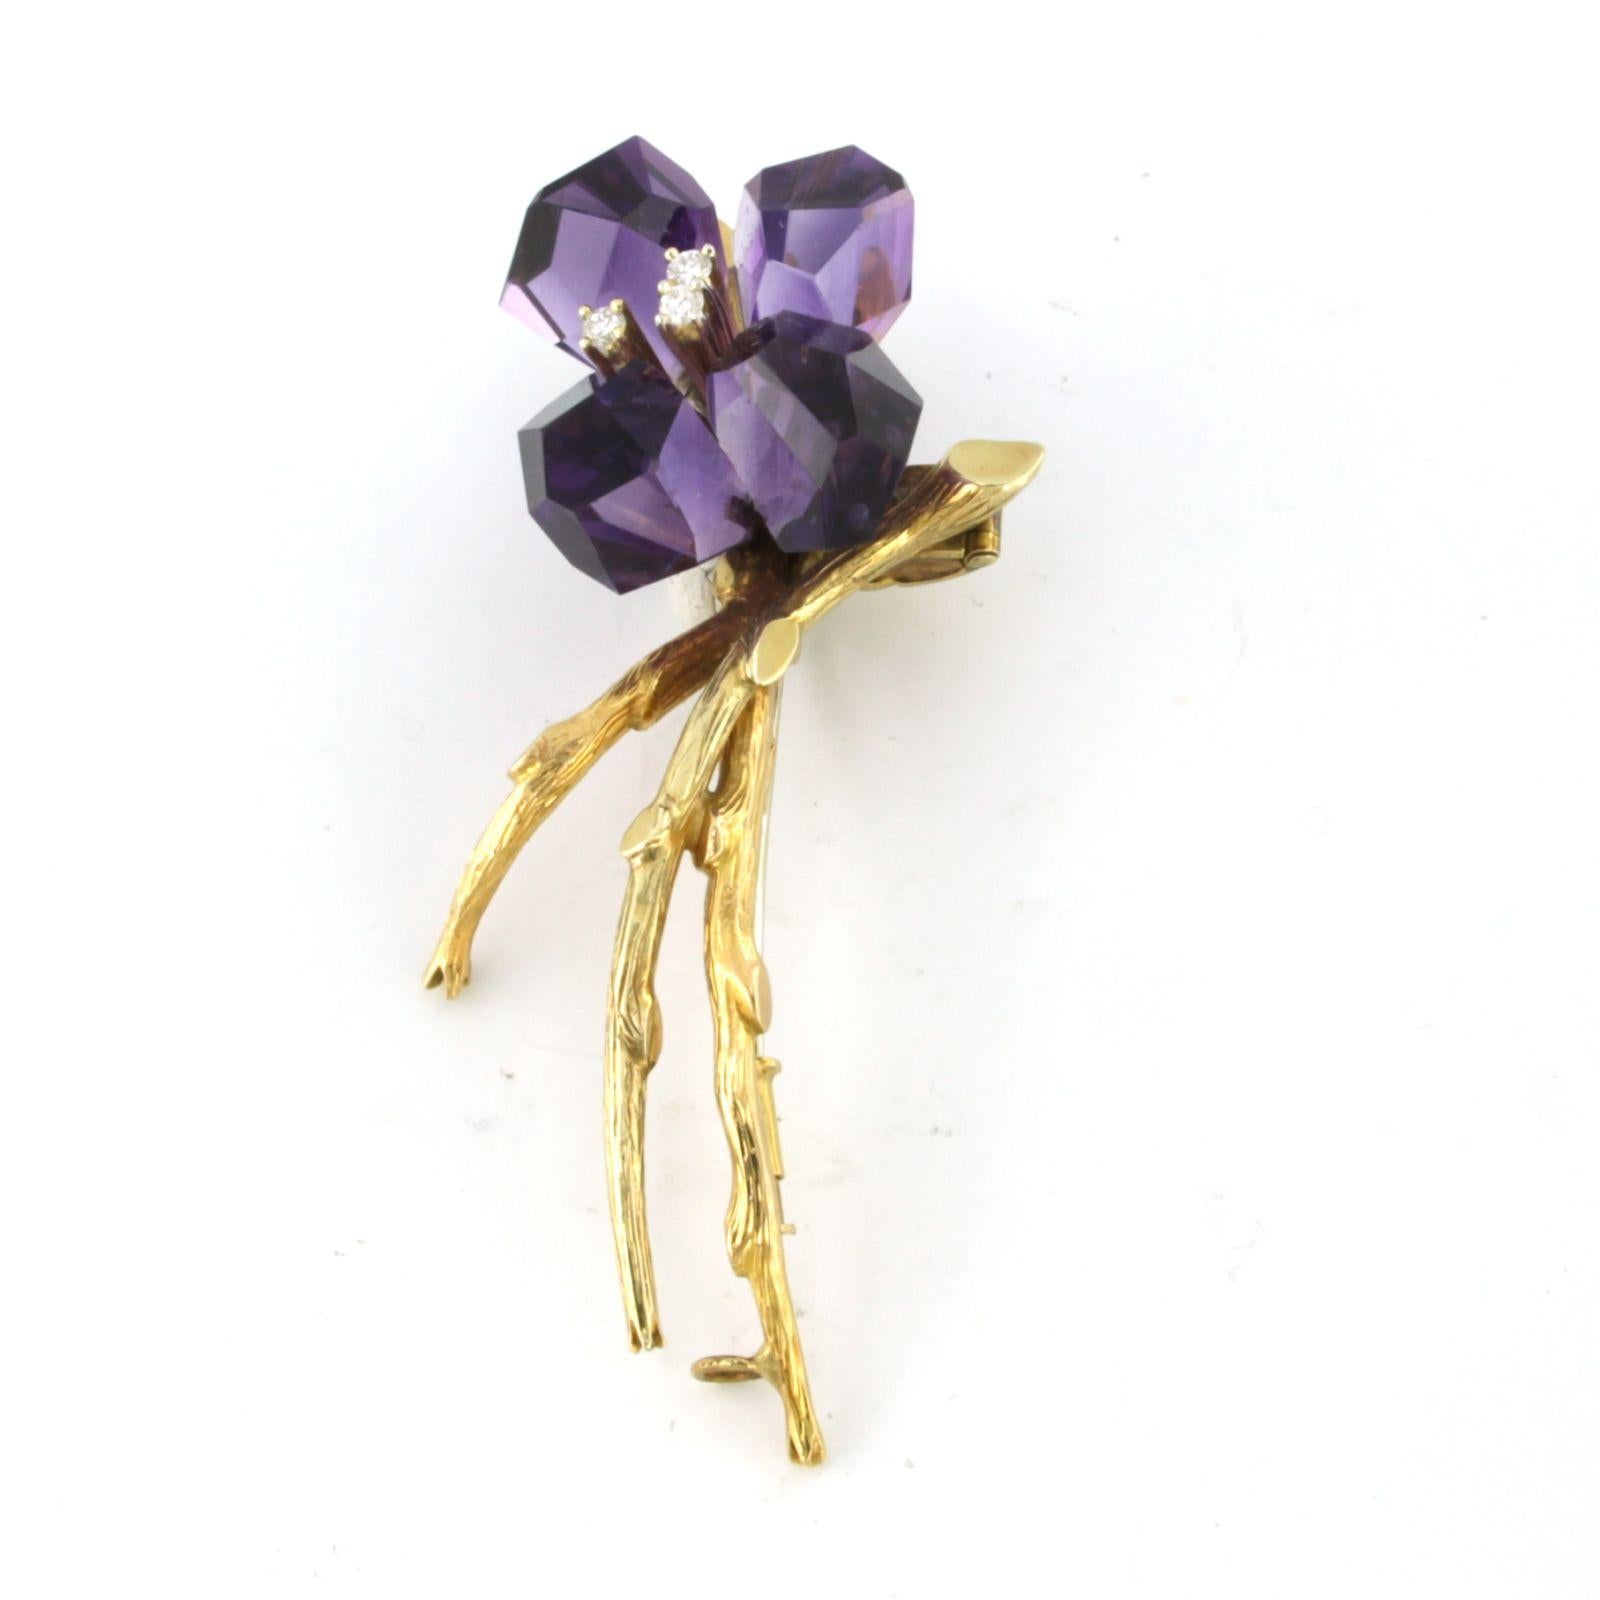 18 carat bicolor gold brooch in the shape of a flower set with amethyst and brilliant cut diamonds in total 0.15ct - F/G - VS/SI

detailed description:

The size of the brooch is 7.0 cm x 3.7 cm wide

weight: 23.2 grams

set with

- 4 x 1.6 cm x 1.0